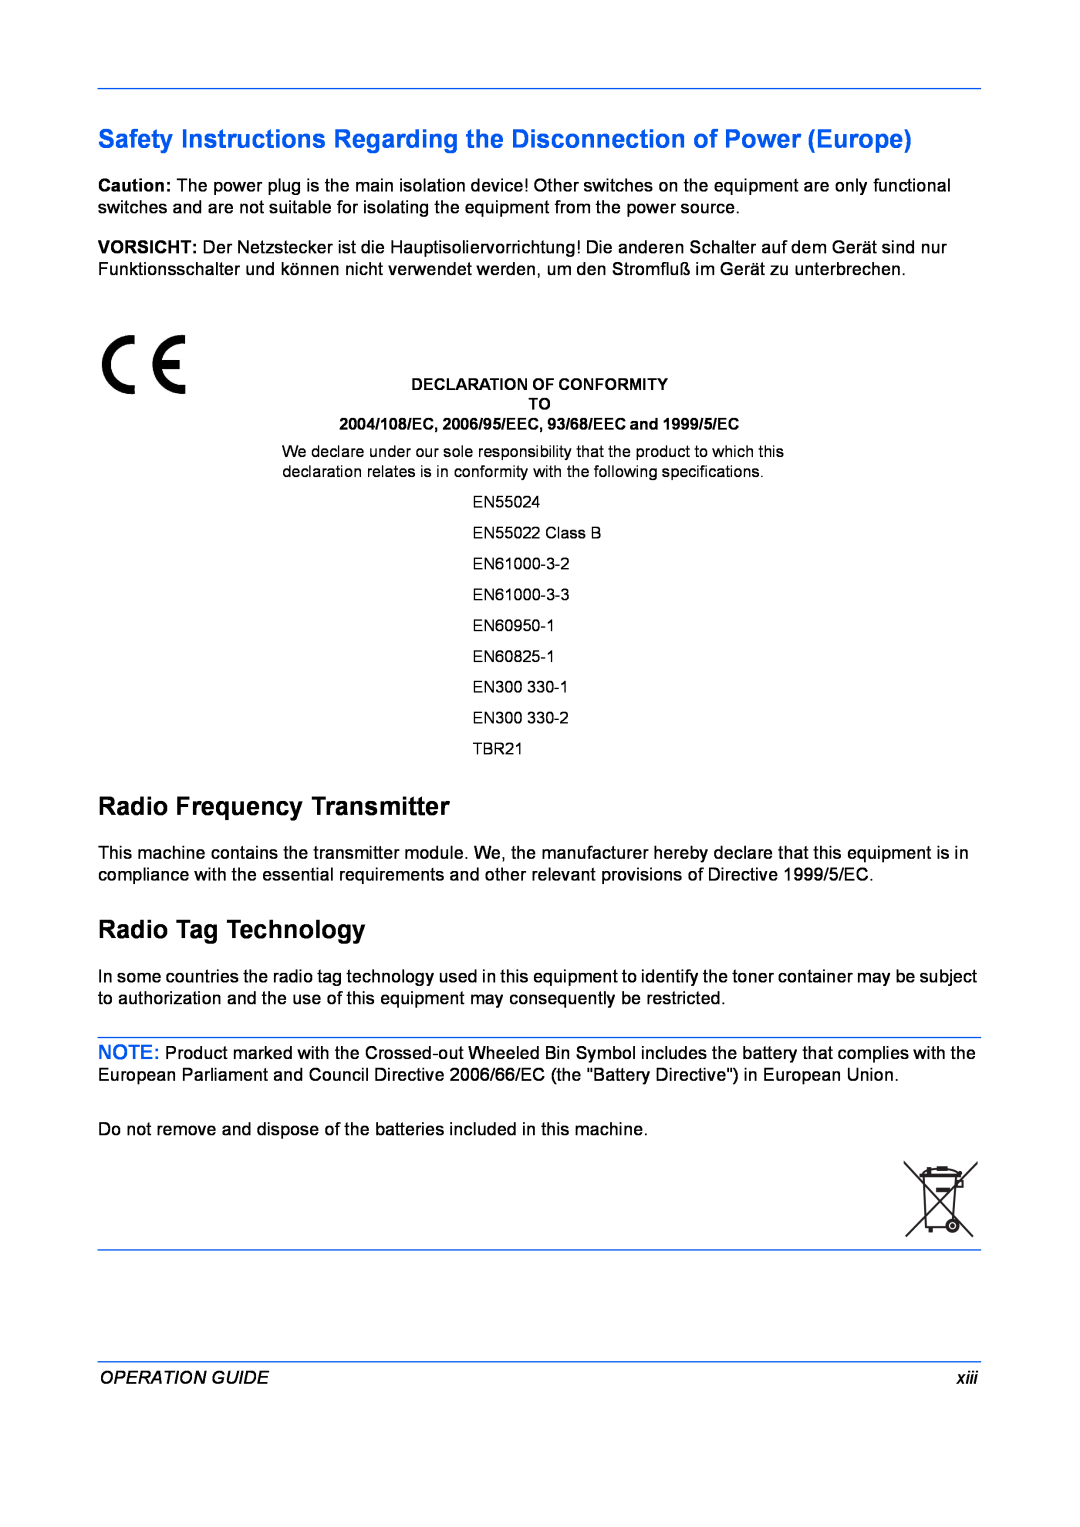 Kyocera FS-1128MFP Safety Instructions Regarding the Disconnection of Power Europe, Radio Frequency Transmitter, xiii 